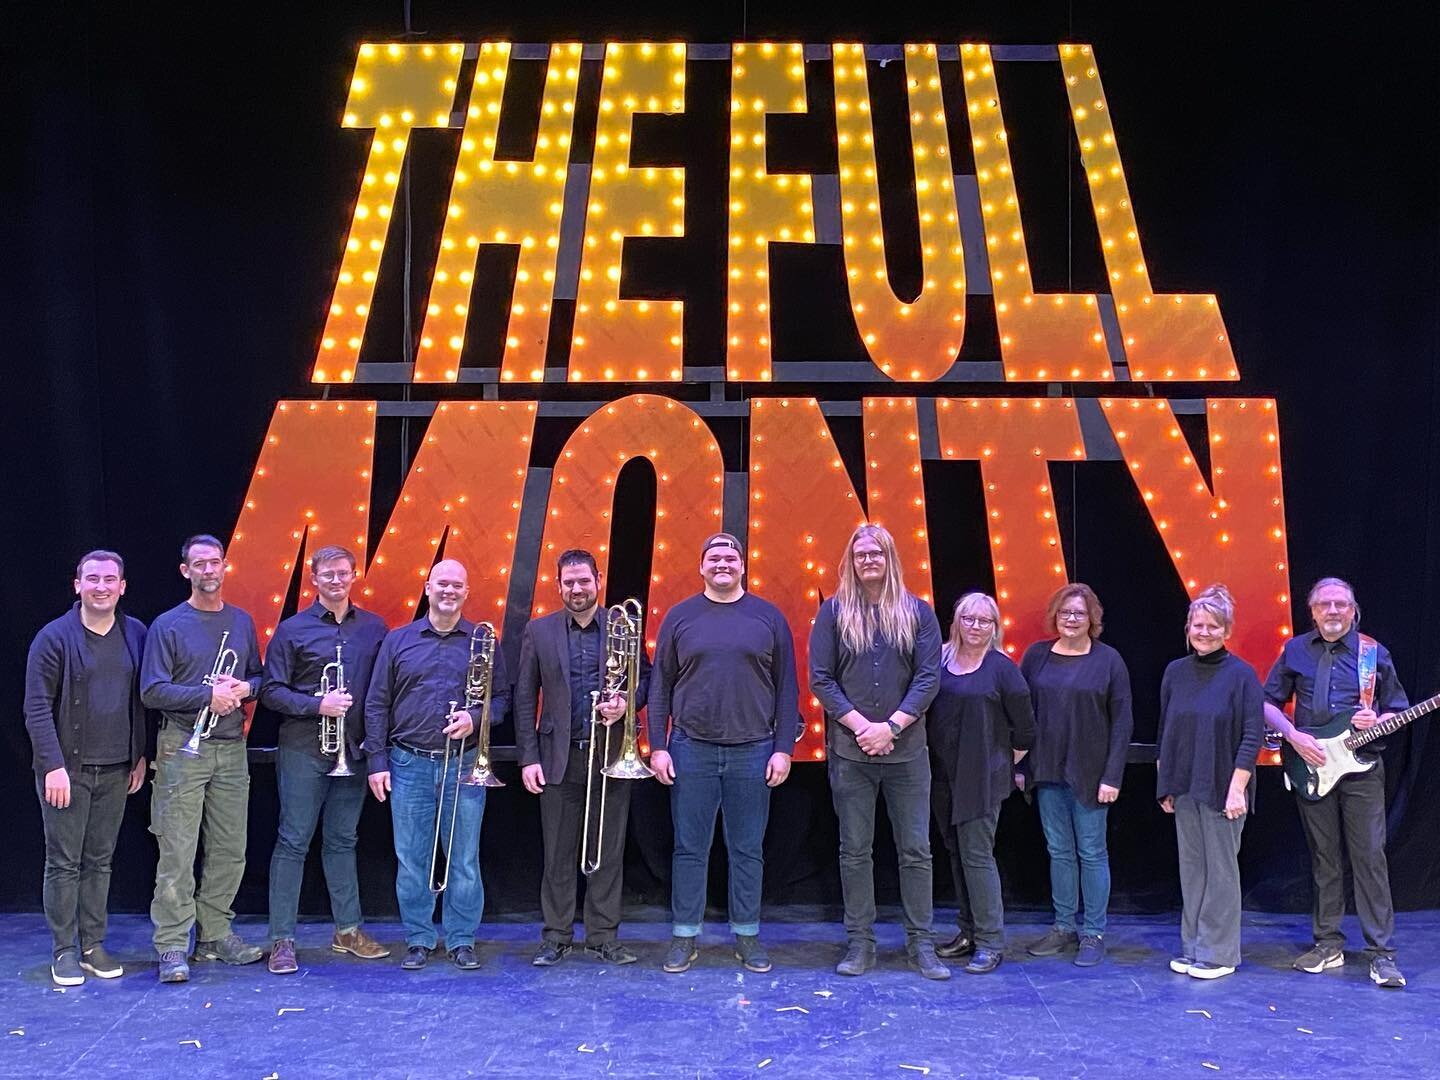 THE FULL MONTY has come to a close! It was a pleasure to conduct our cast and these incredible musicians. Thank you all!